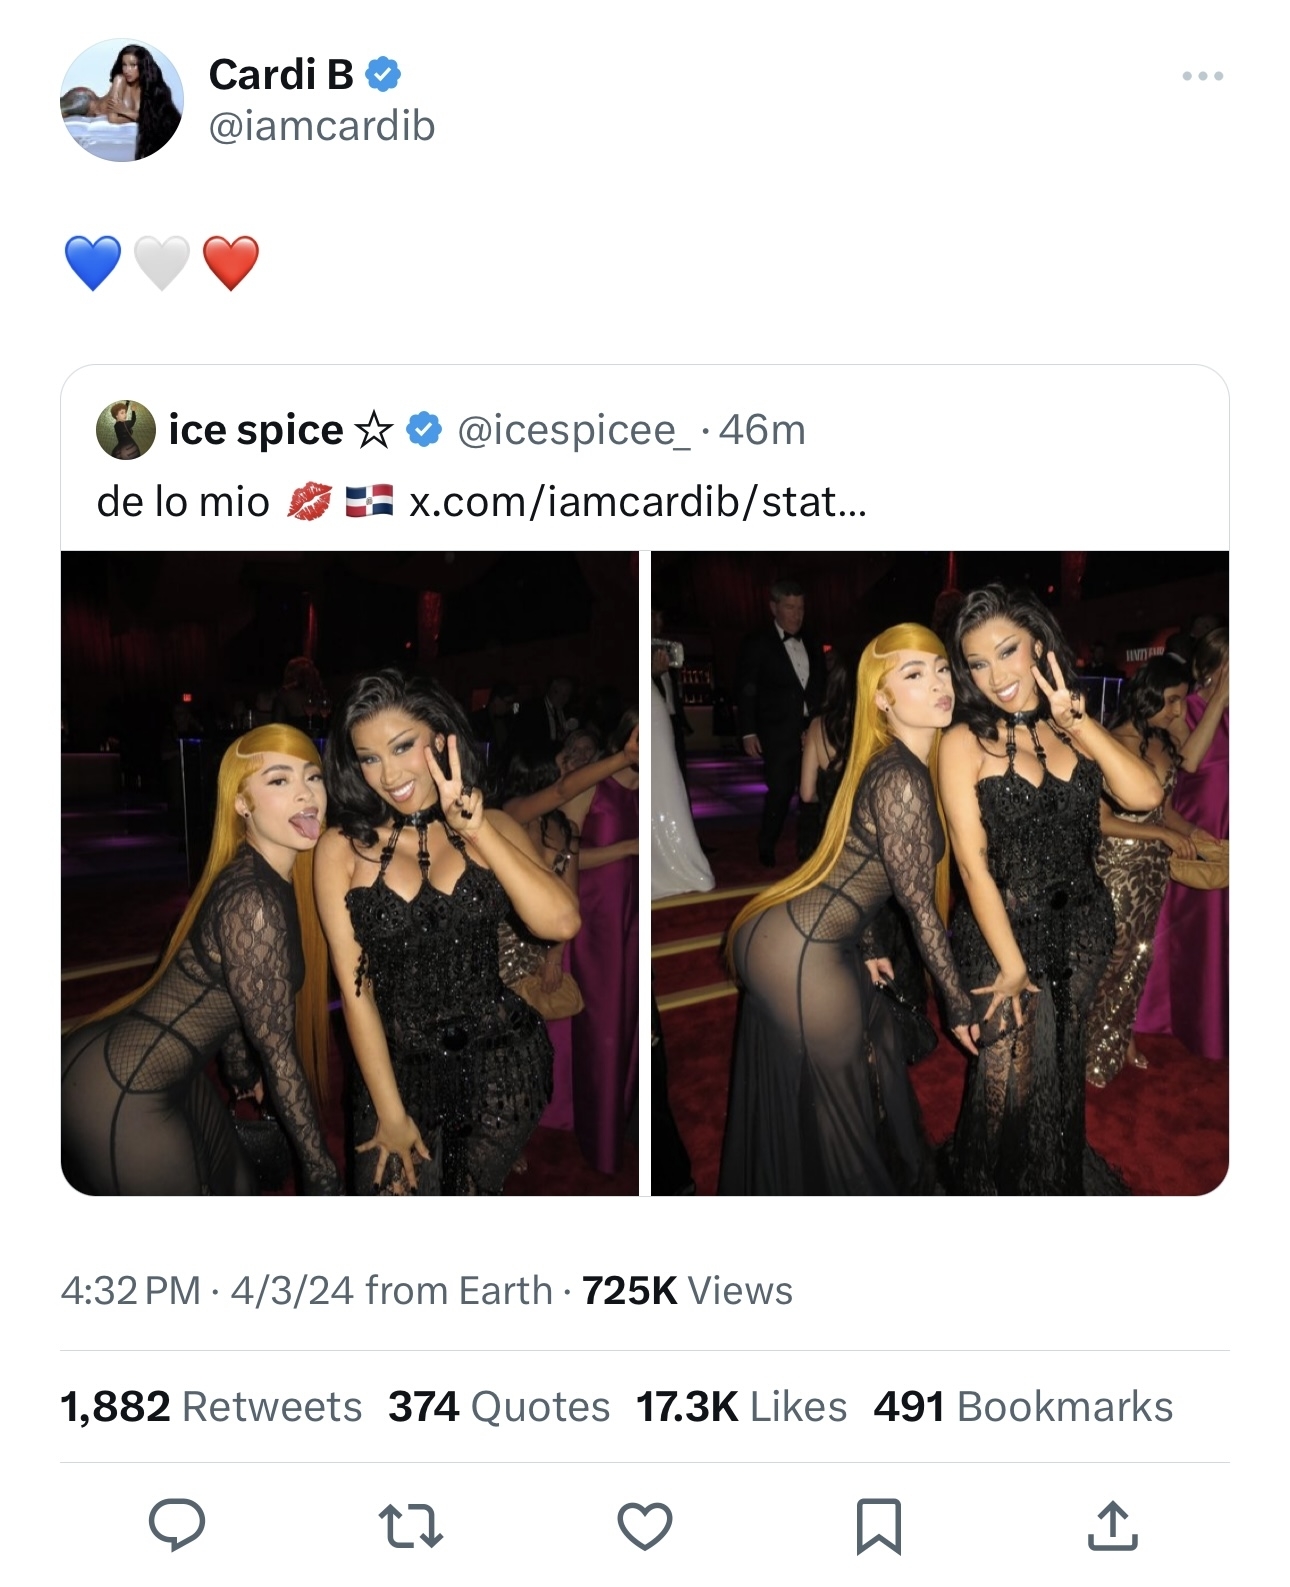 Cardi B and Ice Spice in mesh outfits with peace signs at an event